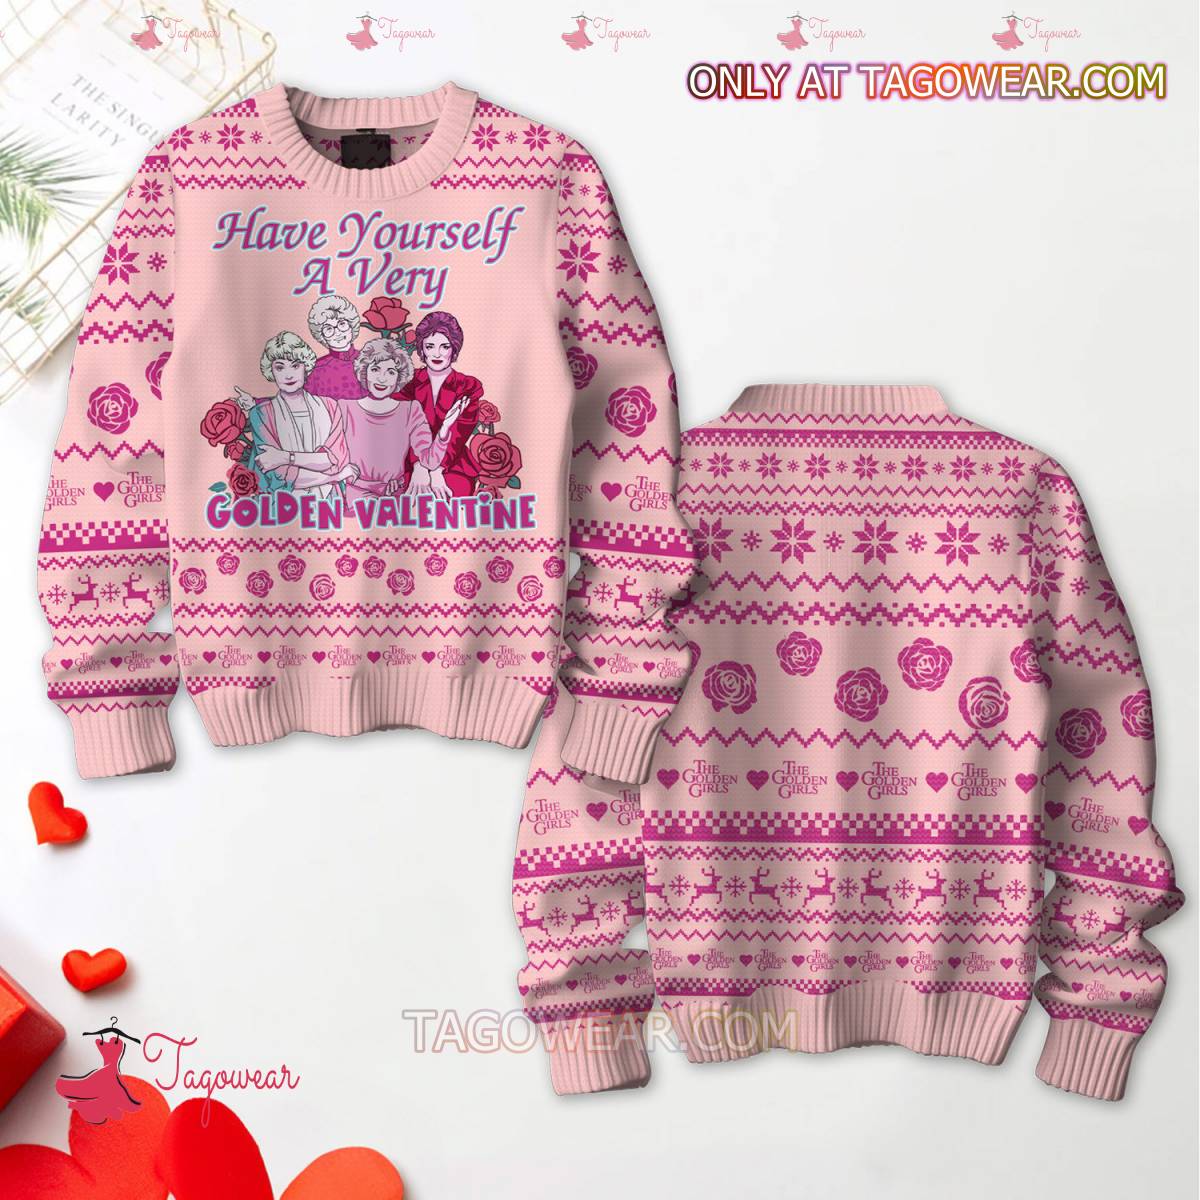 Have Yourself A Very Golden Valentine Sweater